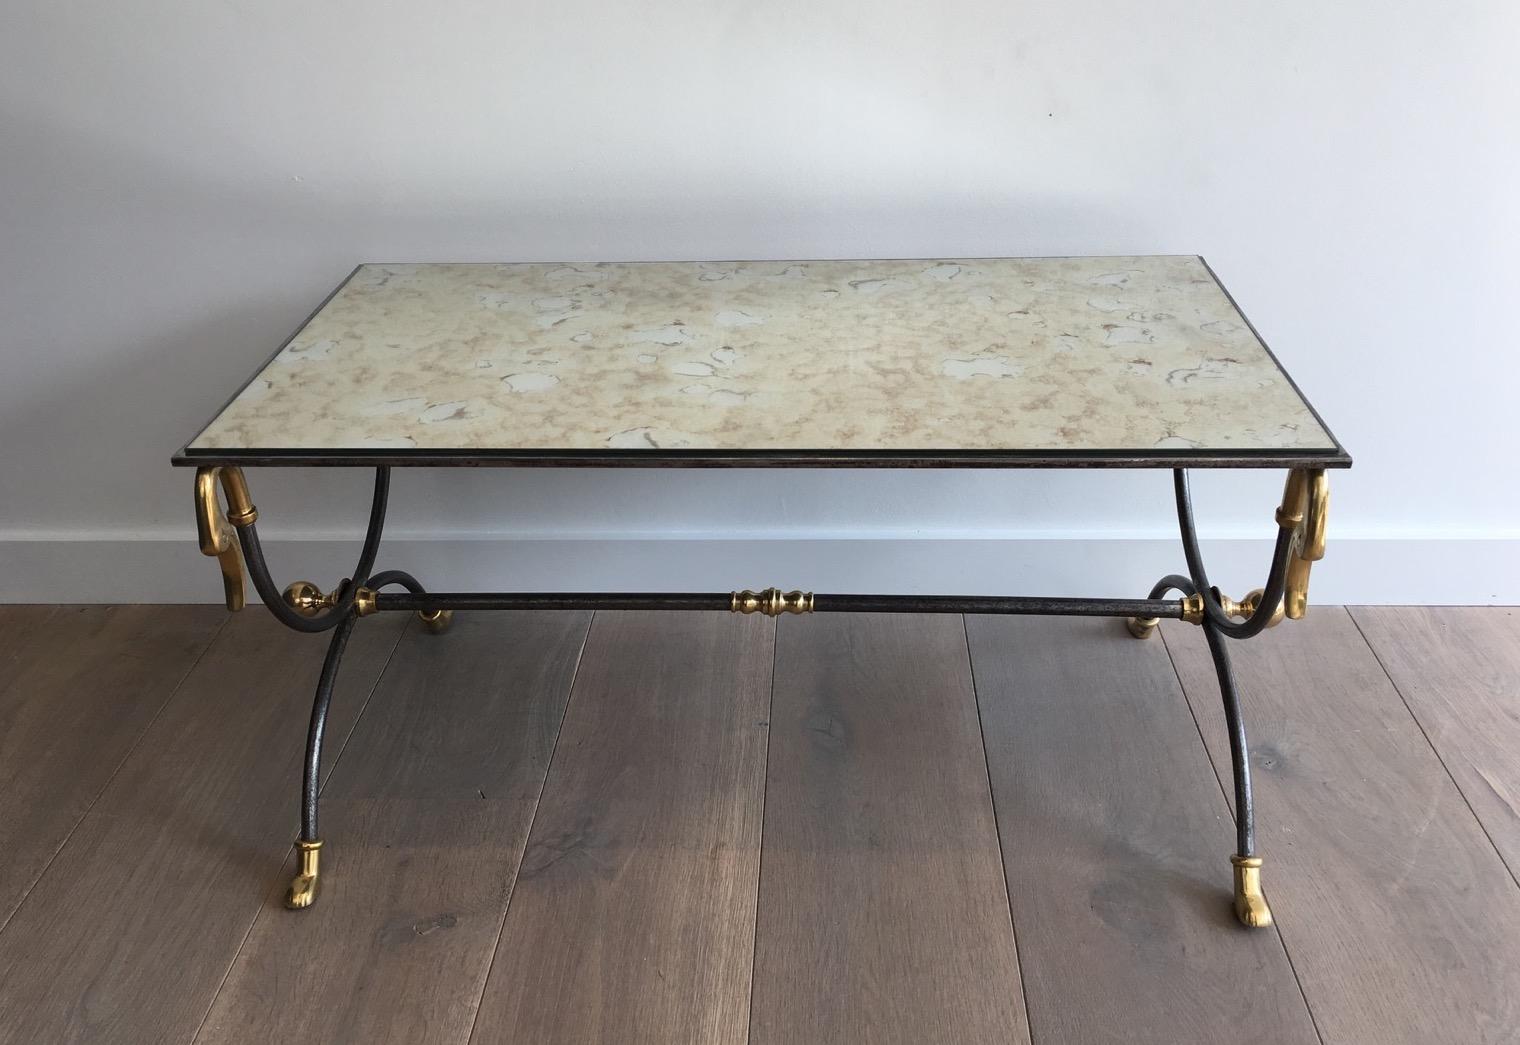 This very elegant coffee table is made of a neoclassical brushed steel base with brass swan heads and feet. It has a faux-antiques mirror. This is a French work attributed to Maison Jansen, circa 1970.